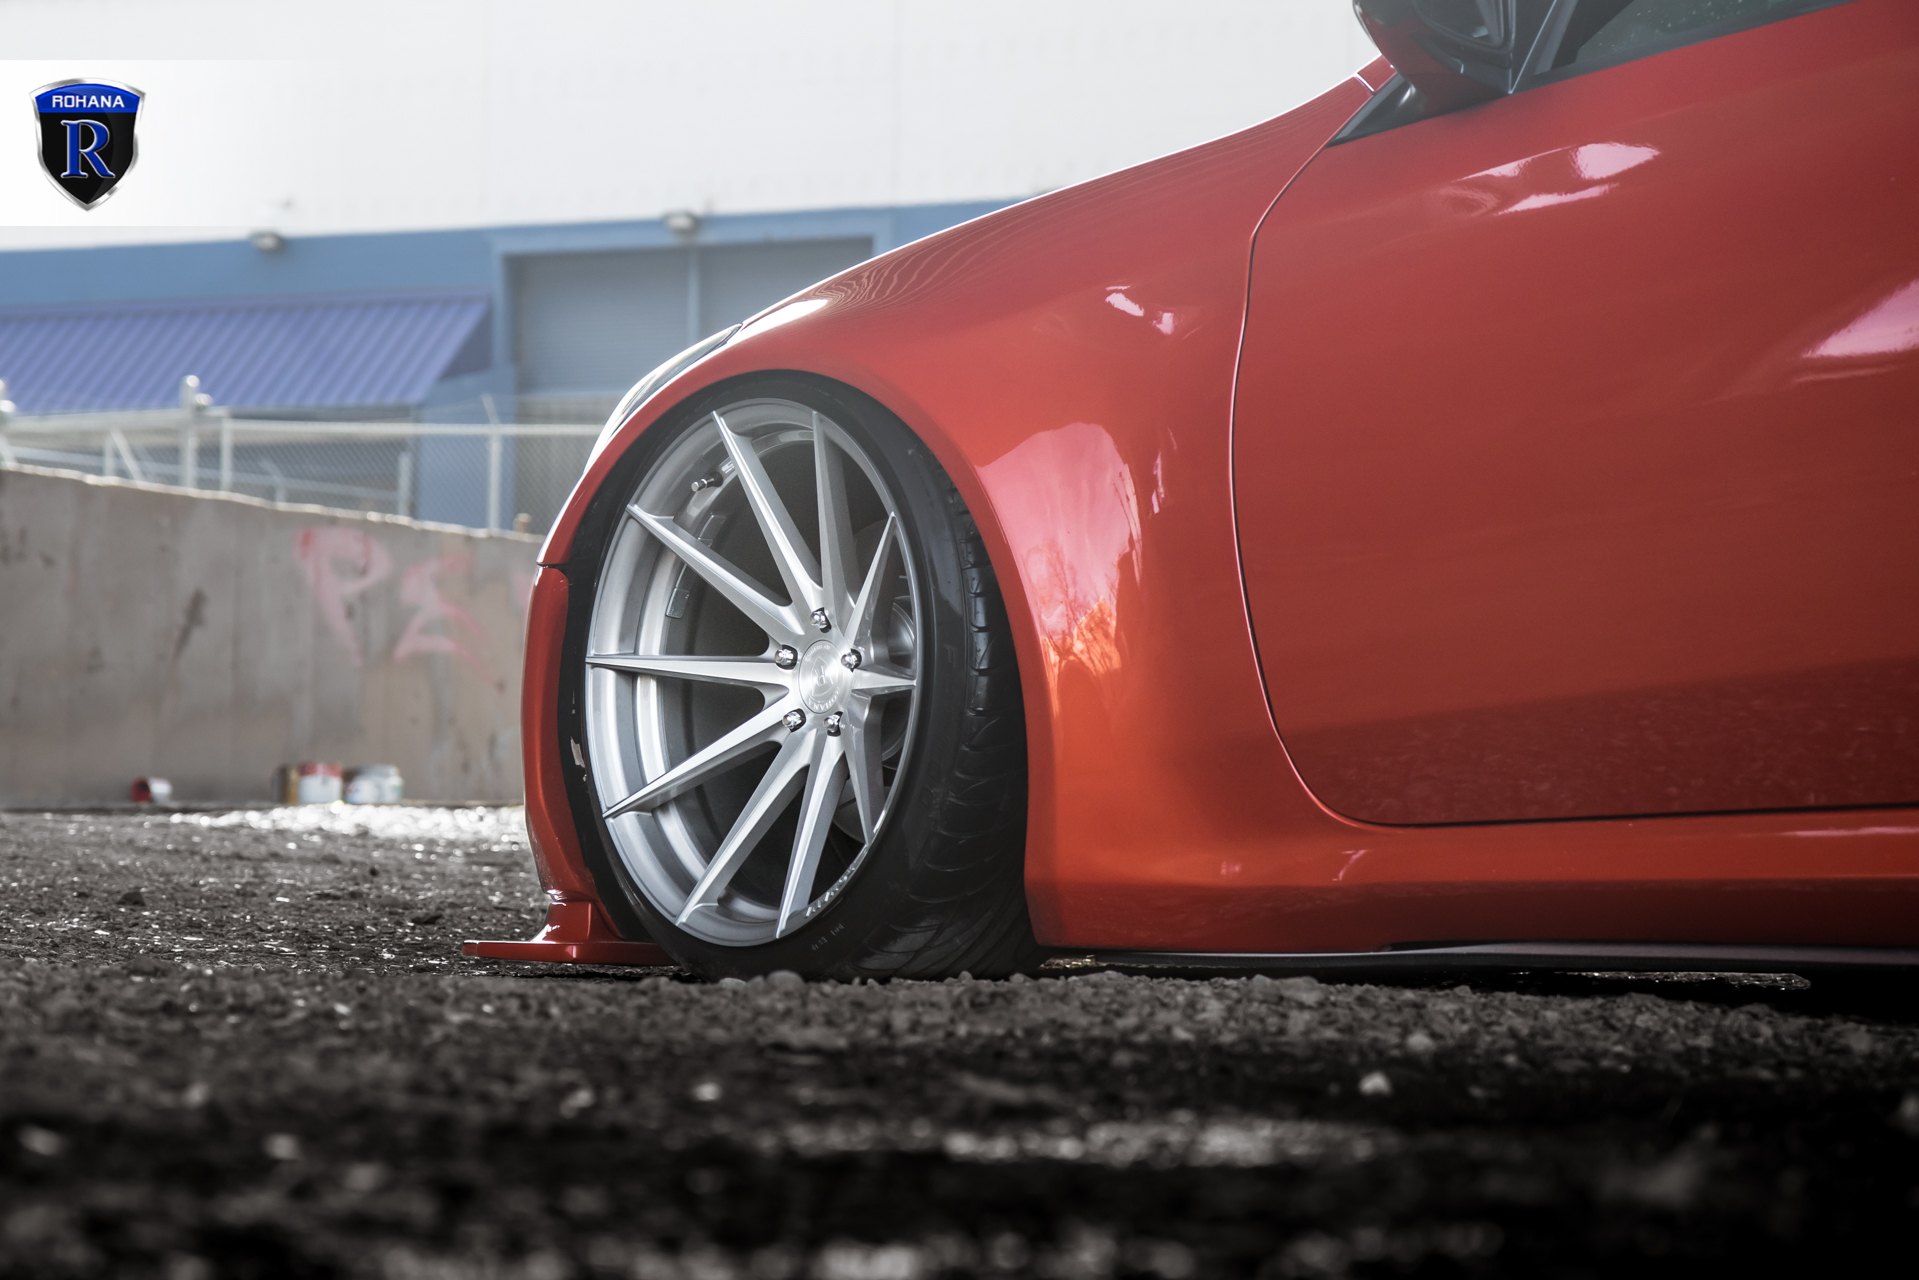 Carbon Fiber Side Skirts on Red Hyundai Genesis Coupe - Photo by Rohana Wheels